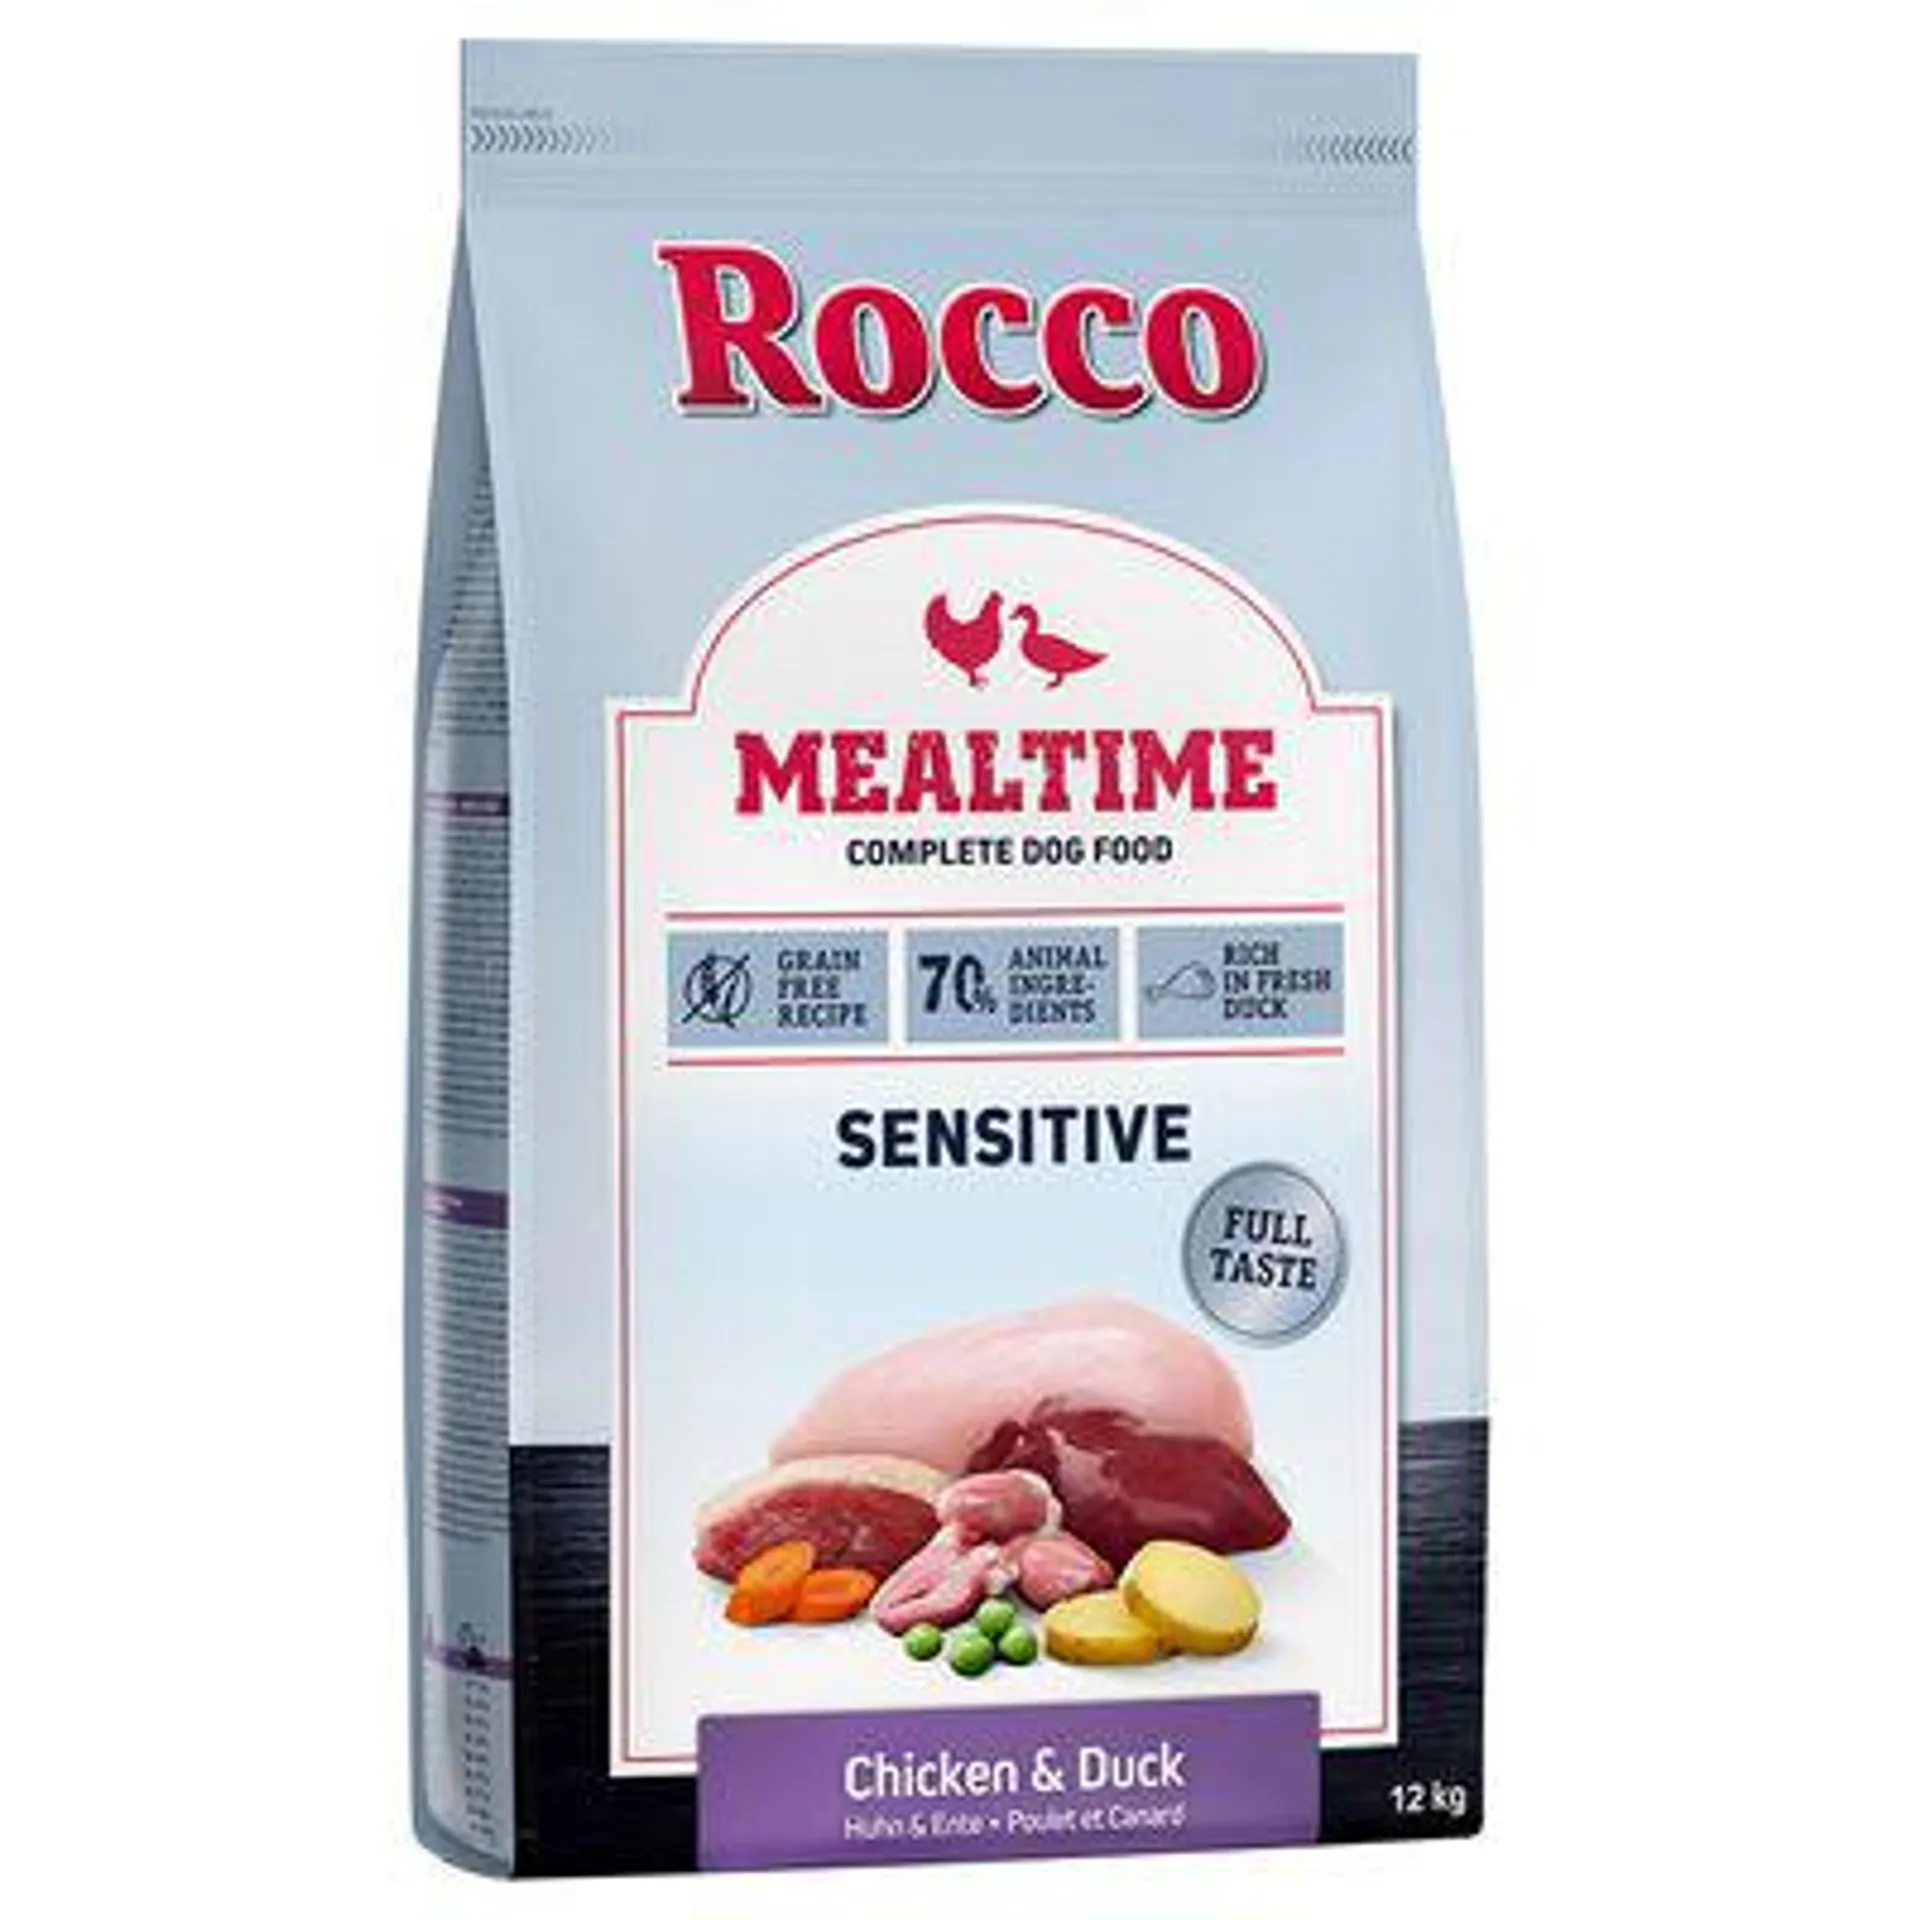 12kg Rocco Mealtime Dry Dog Food - Special Price!*